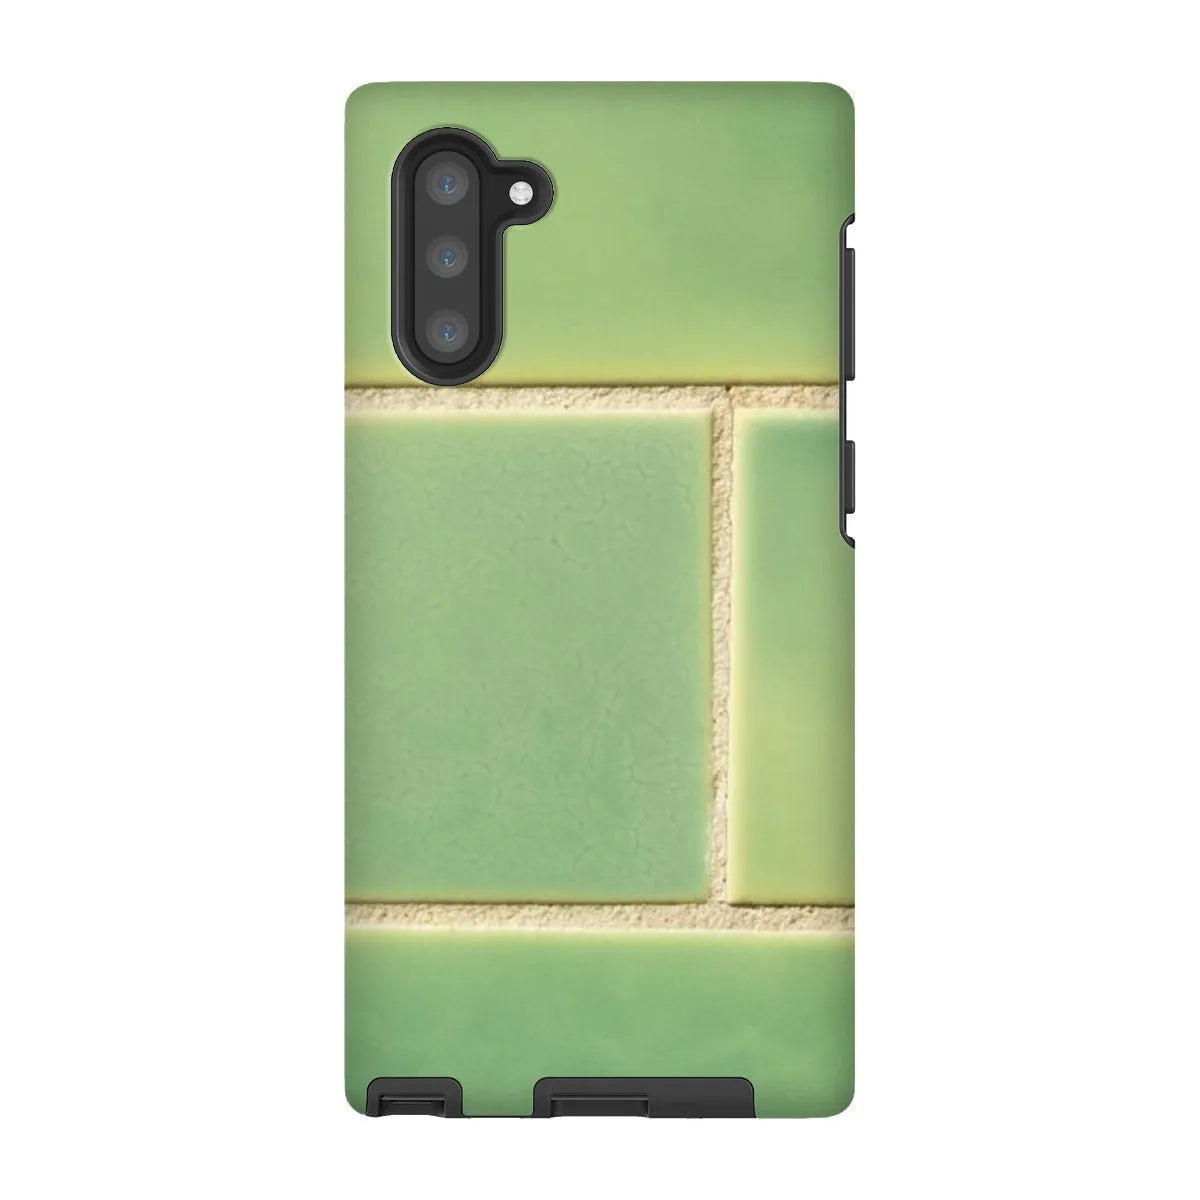 Emerald City Tough Phone Case - Samsung Galaxy Note 10 / Matte - Mobile Phone Cases - Aesthetic Art